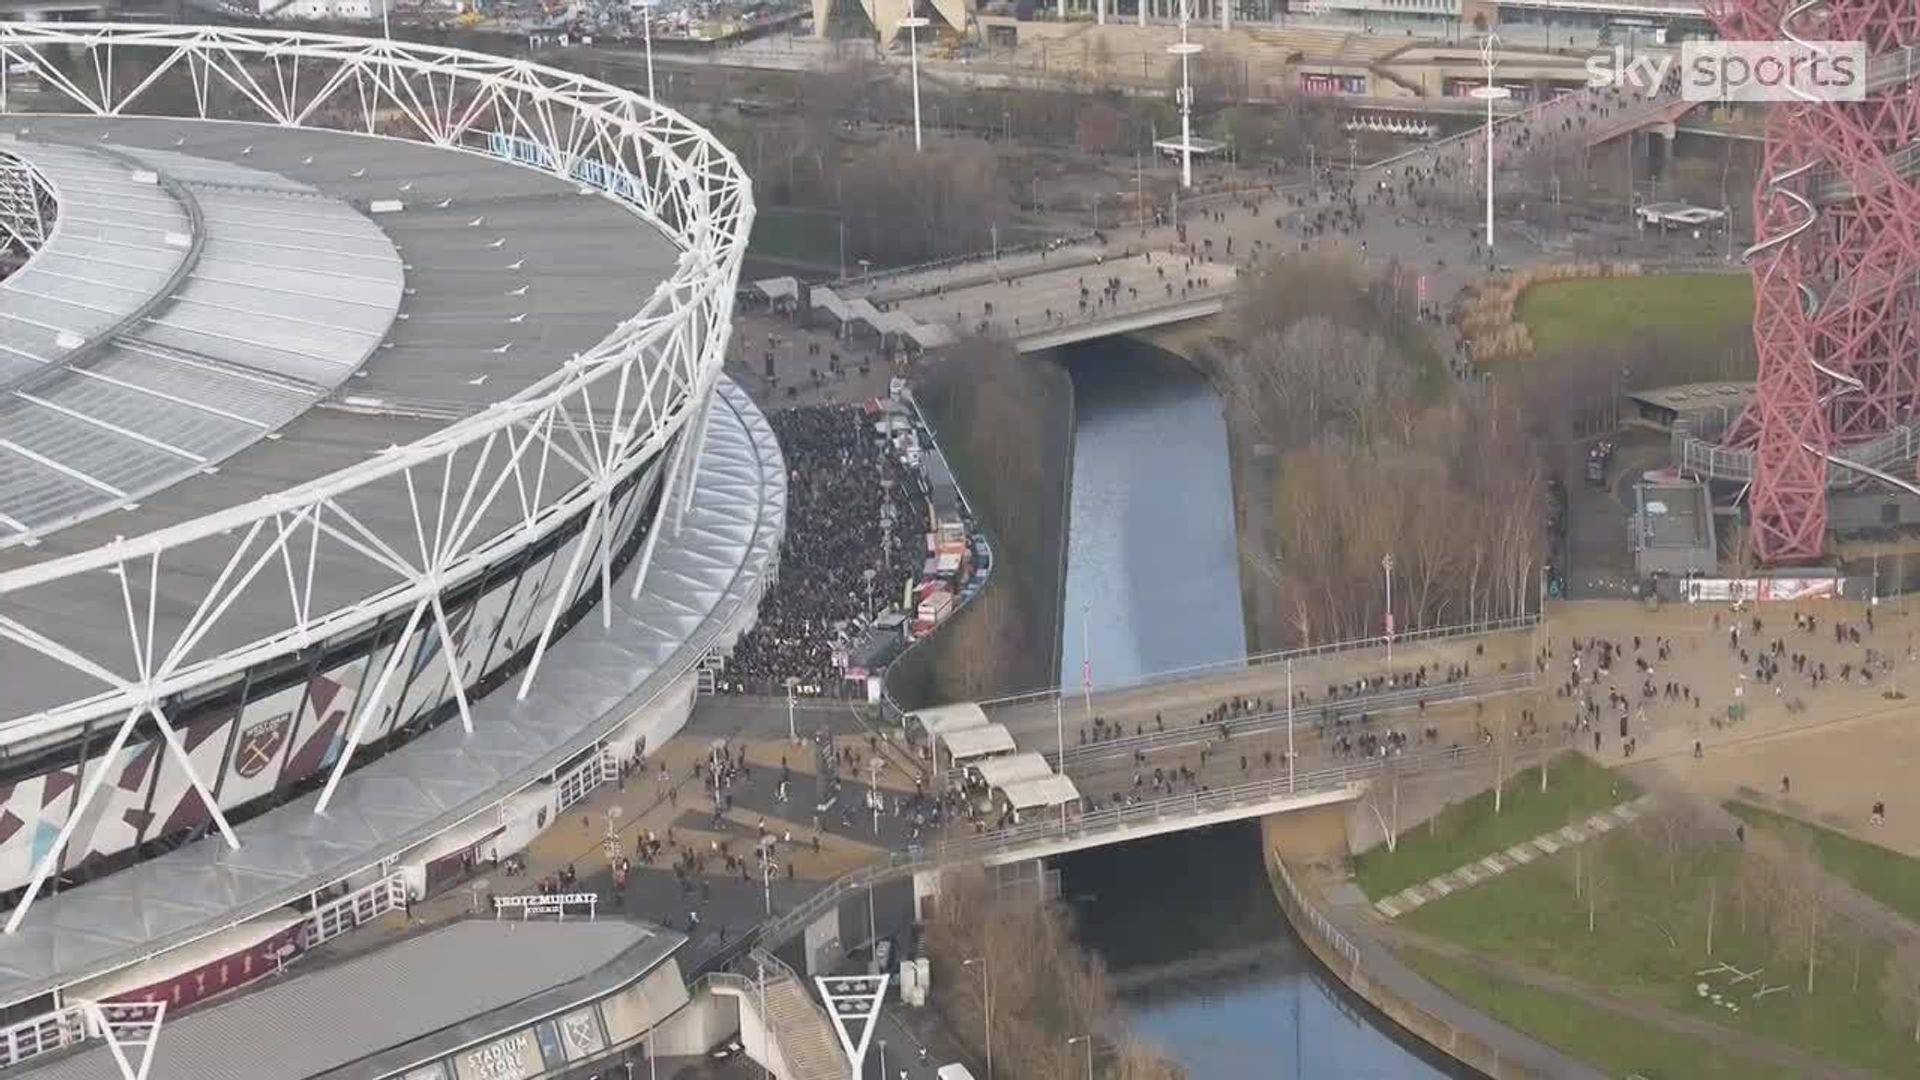 Remarkable scenes as 'thousands' of West Ham fans leave before half-time